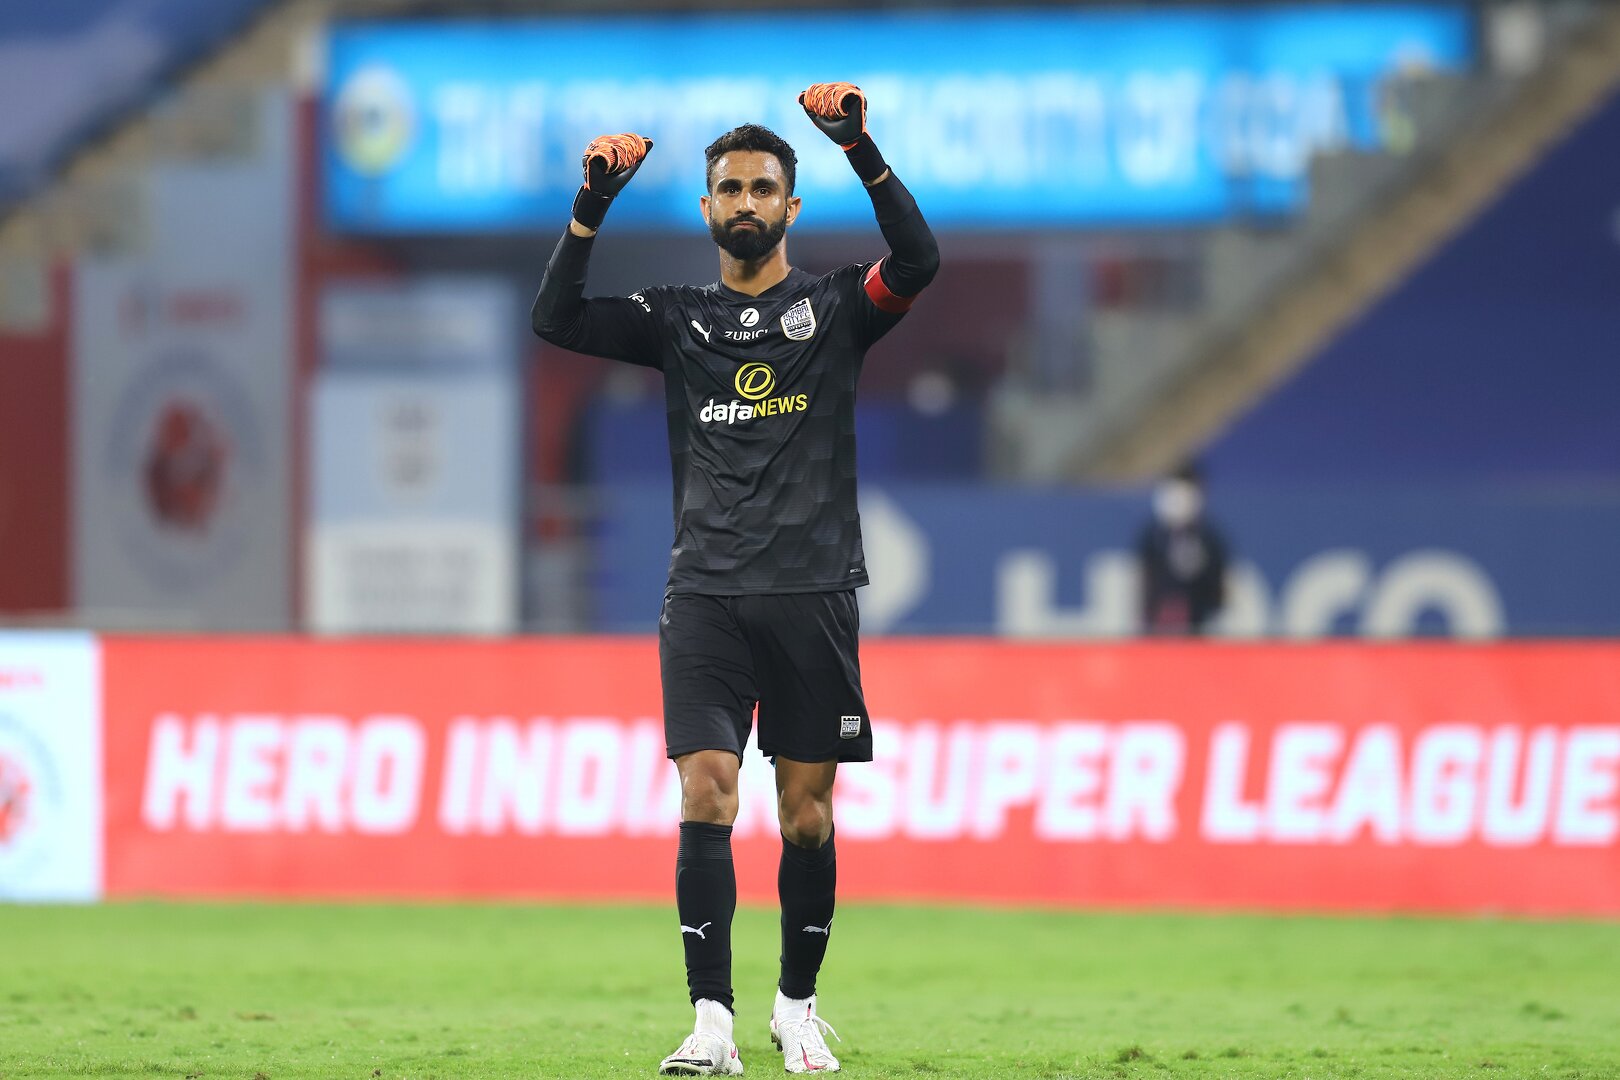 We're ready to bring home our first ISL trophy, asserts Amrinder Singh